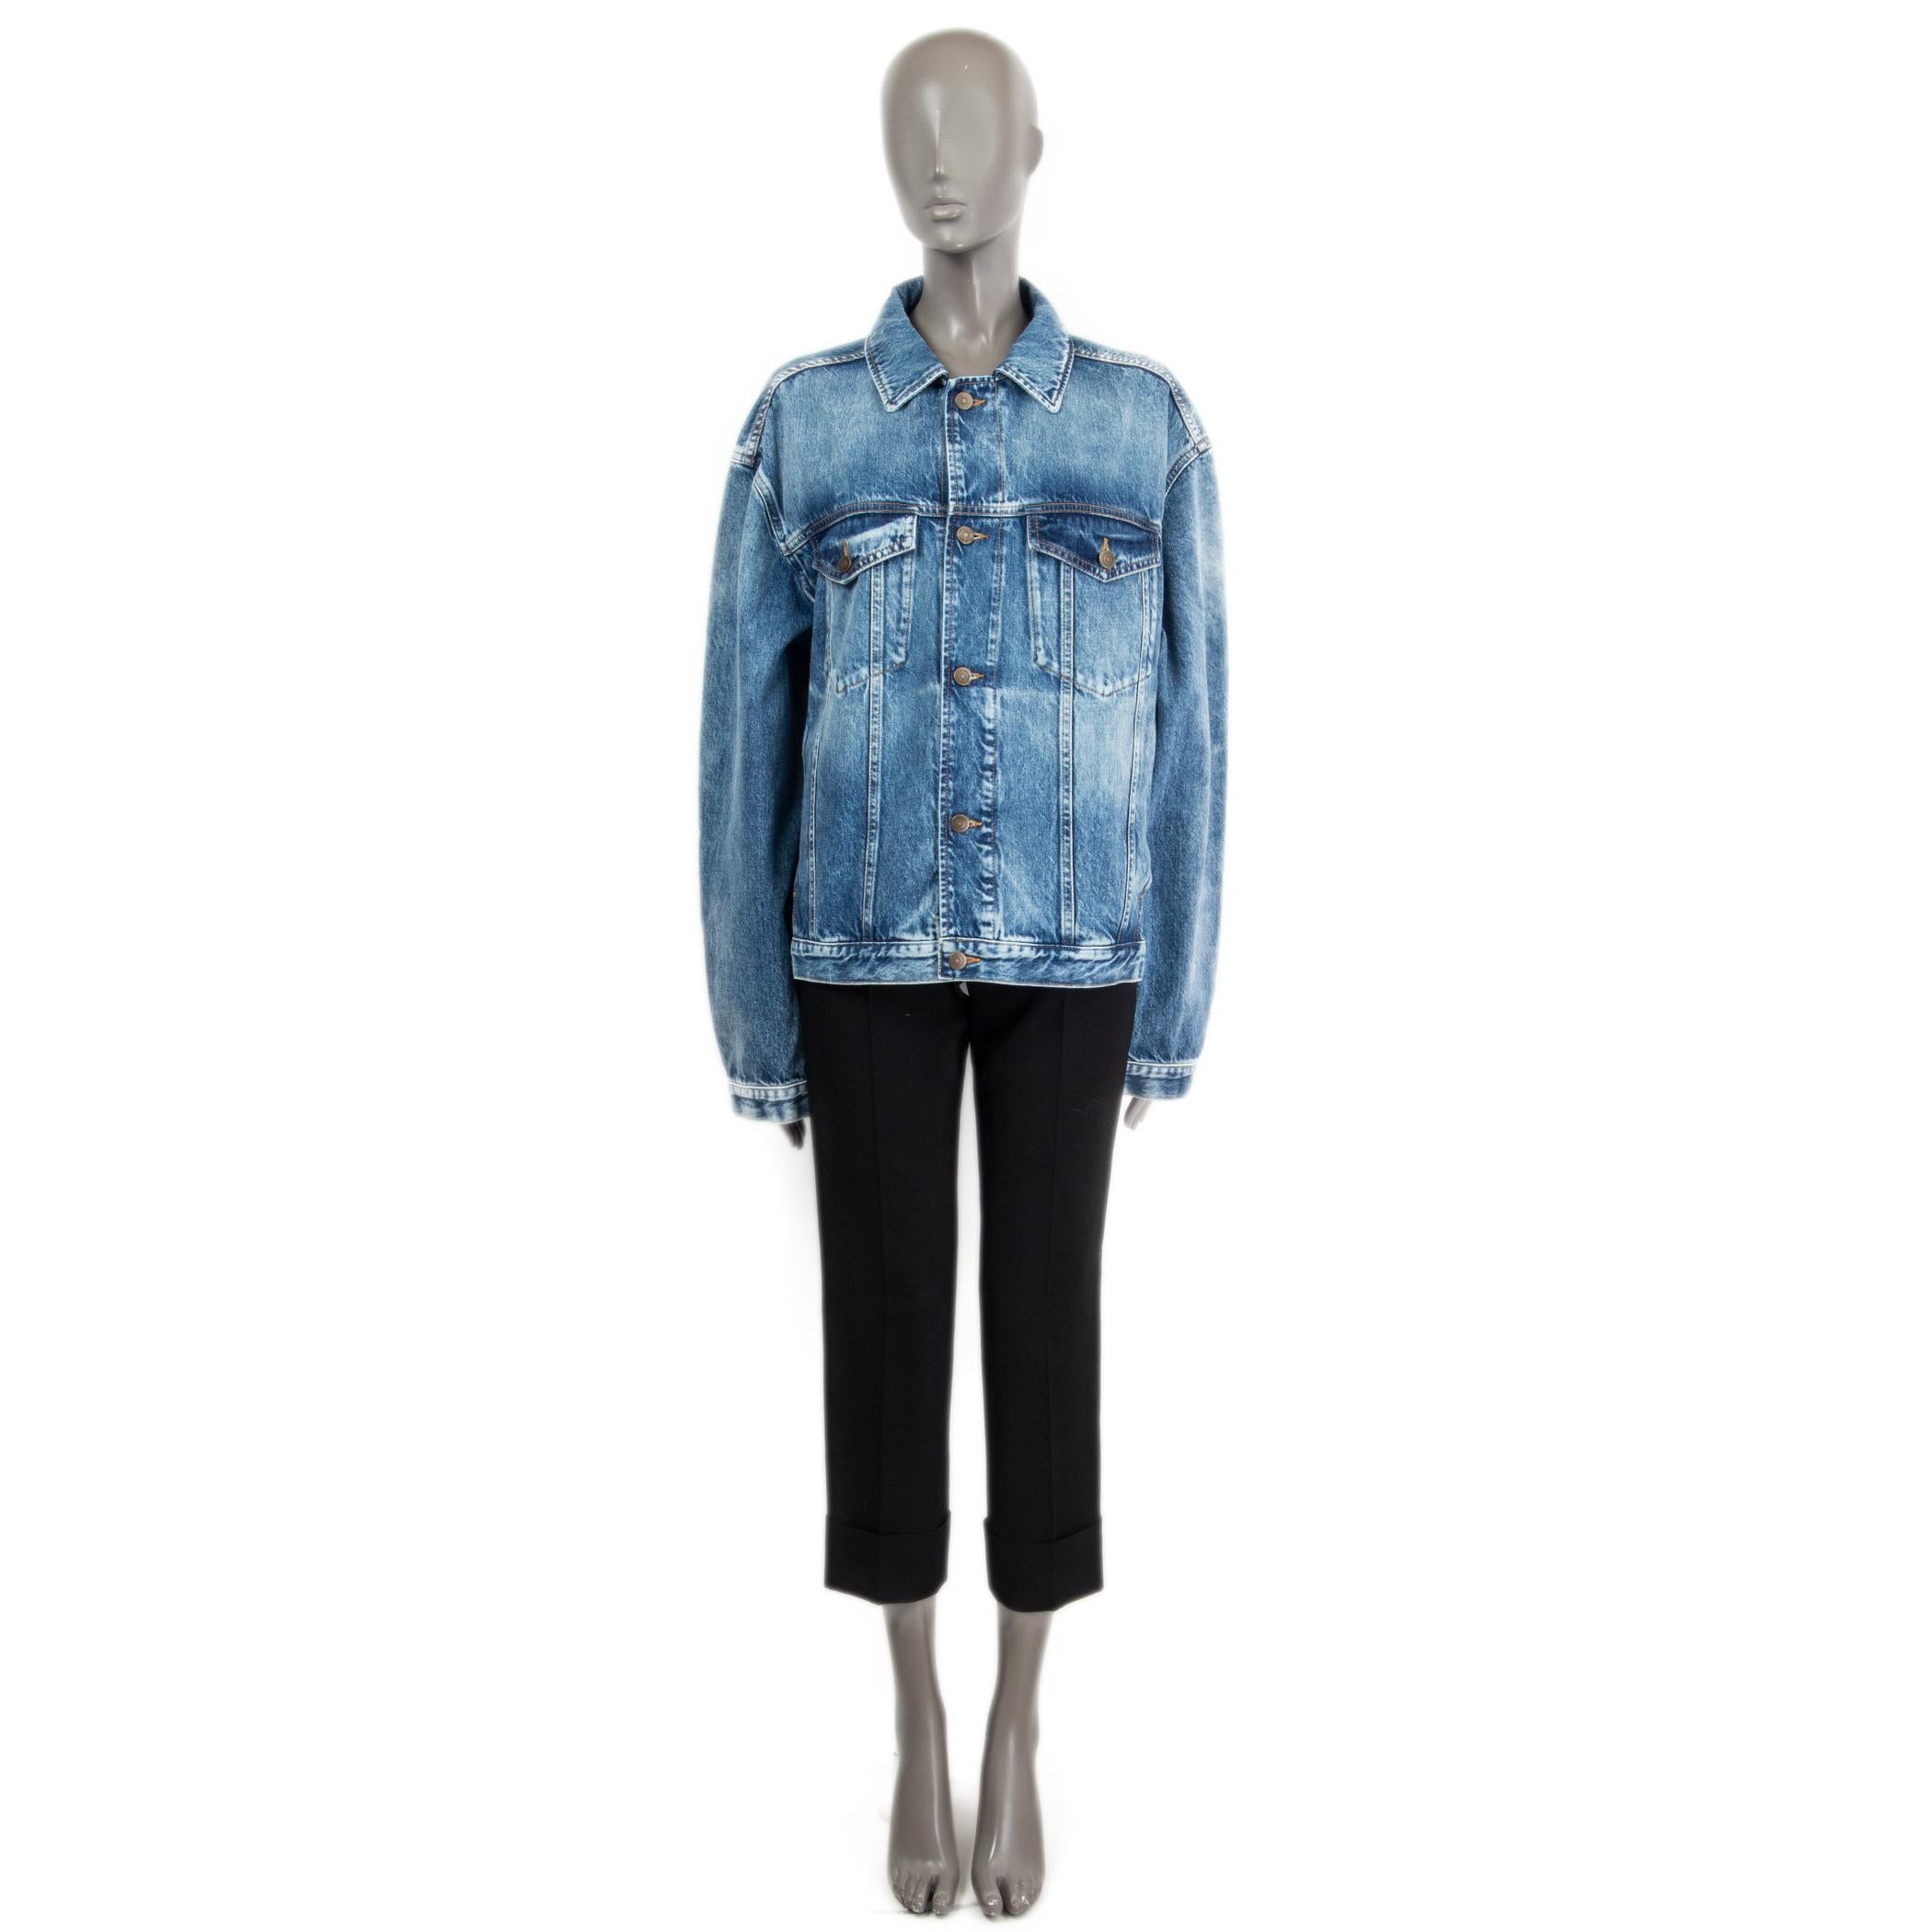 100% authentic Maison Margiela oversized washed-out denim jacket in blue cotton (100%). Opens with front buttons and is embellished with two front flap-pockets and two side slit-pockets. Has been worn and is in excellent condition.